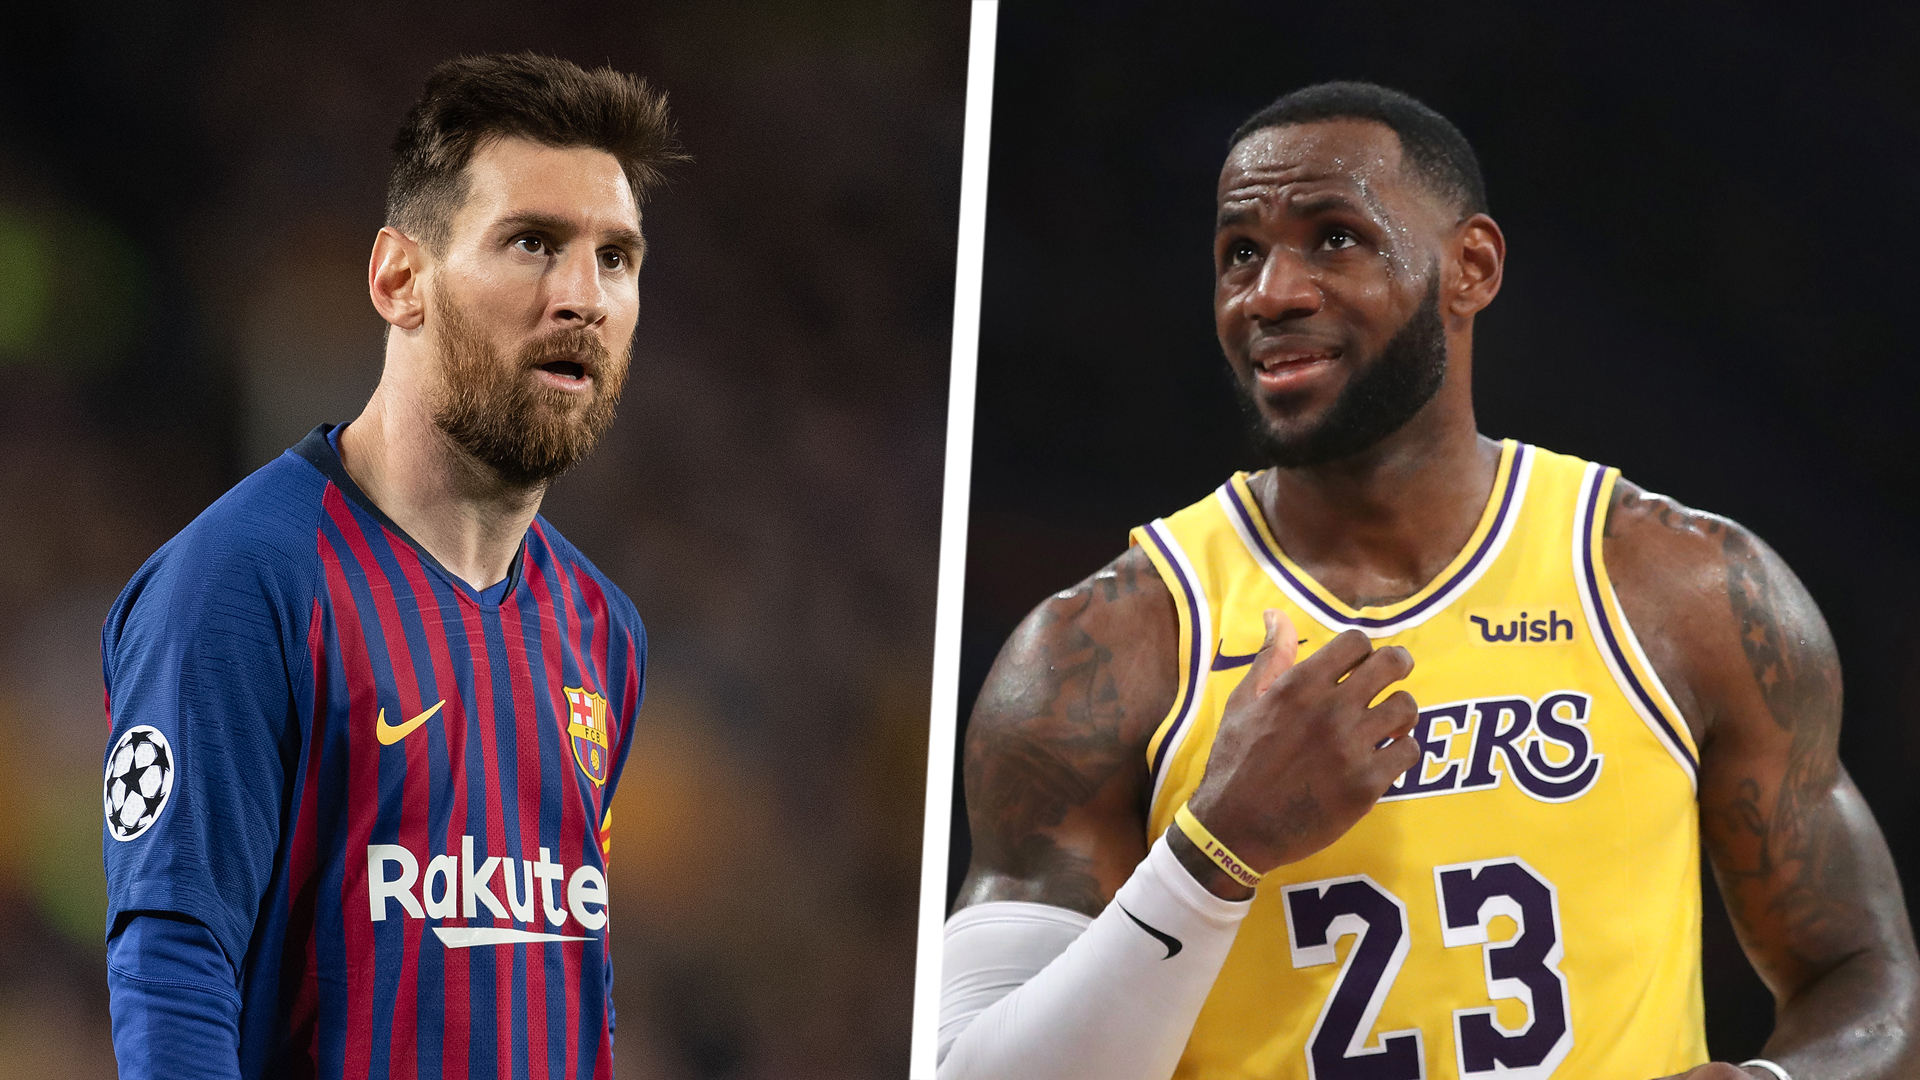 'Messi is a legend like LeBron James' - Griezmann excited to partner star at Barcelona